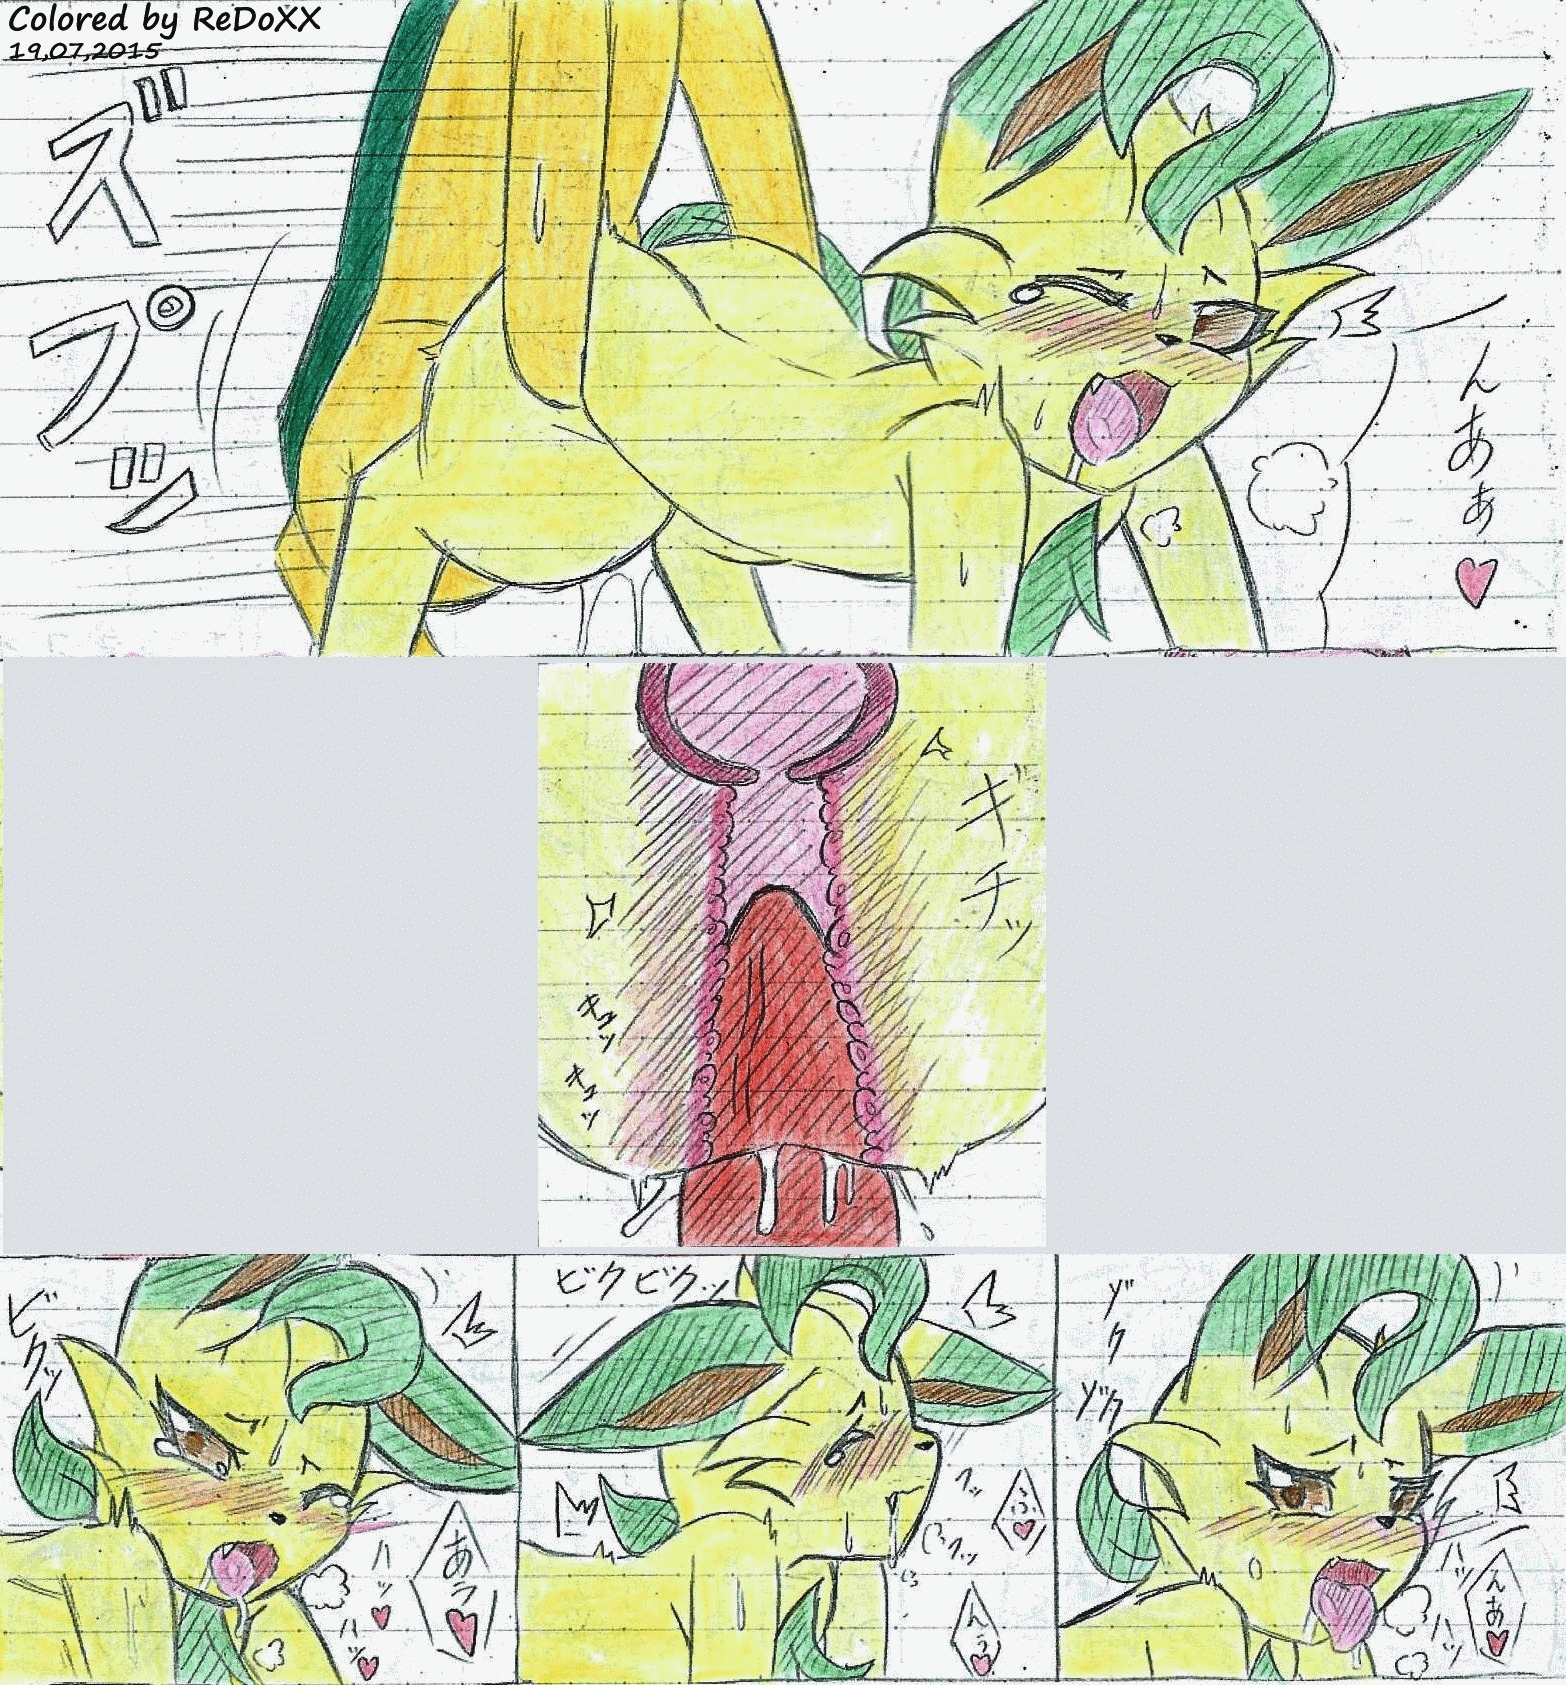 Leafeon X Quilava [Colorized by ReDoXX] 21